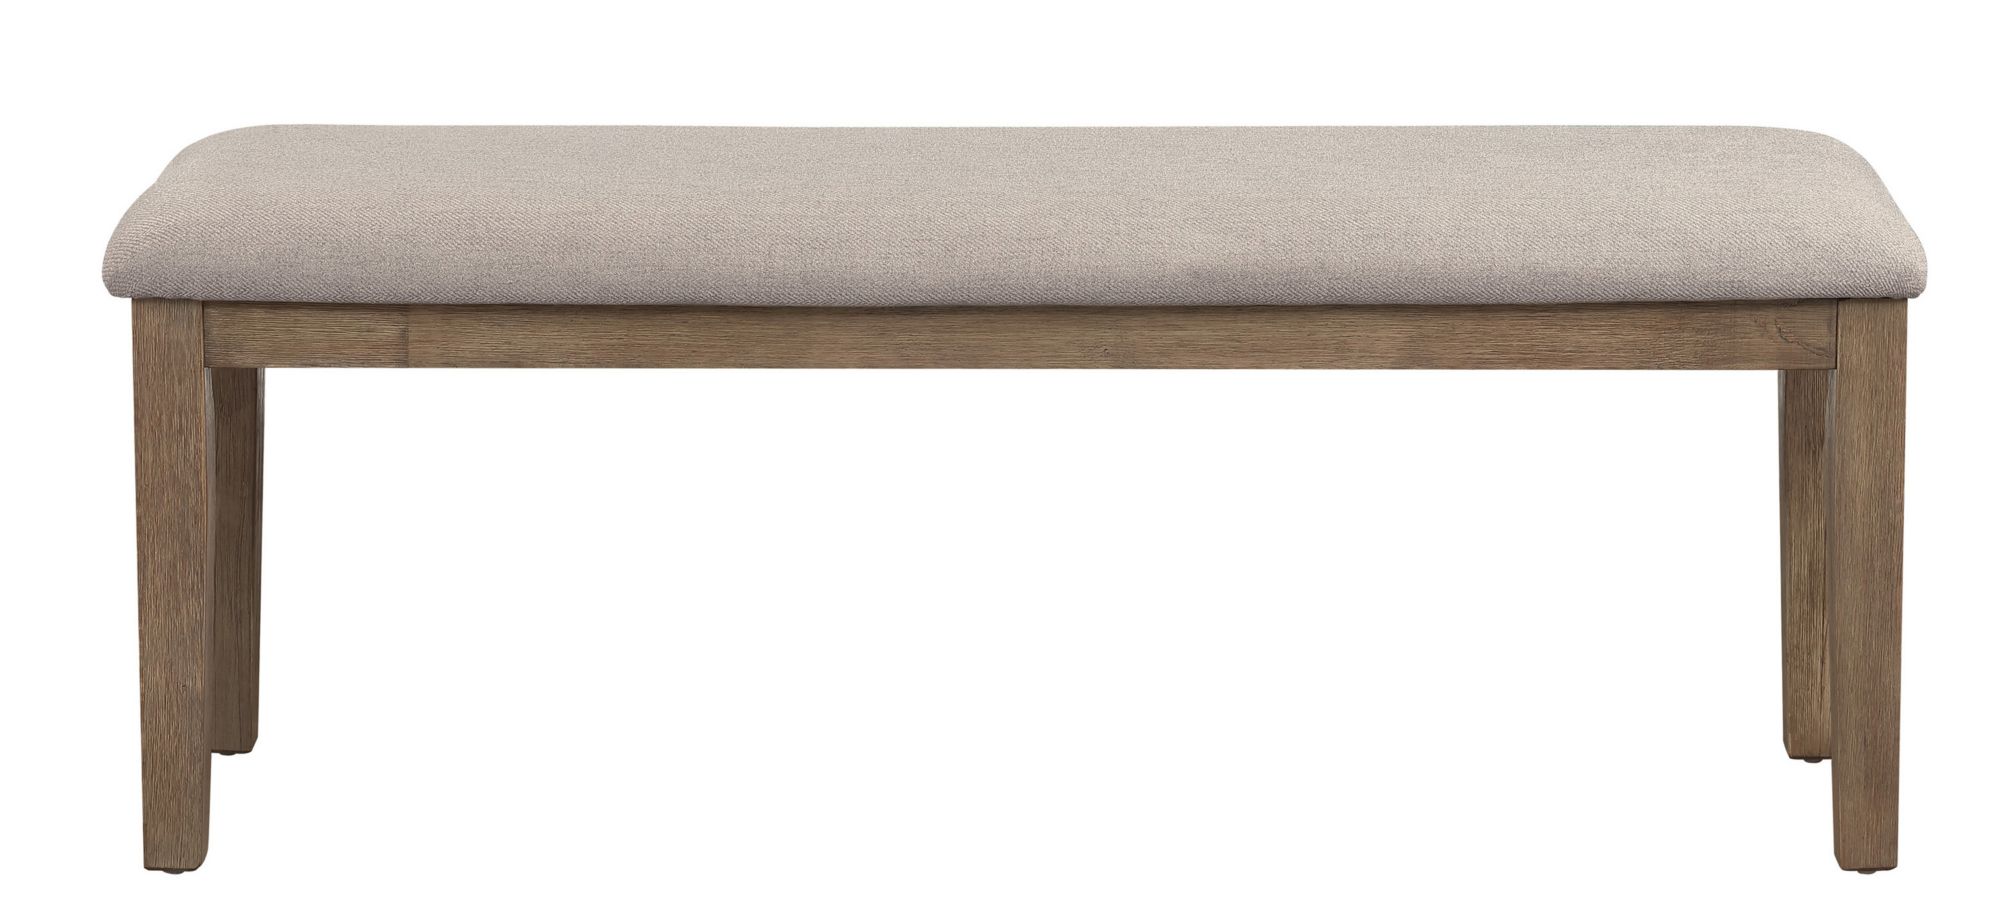 Brim Dining Room Bench in Wire Brushed Brown by Homelegance